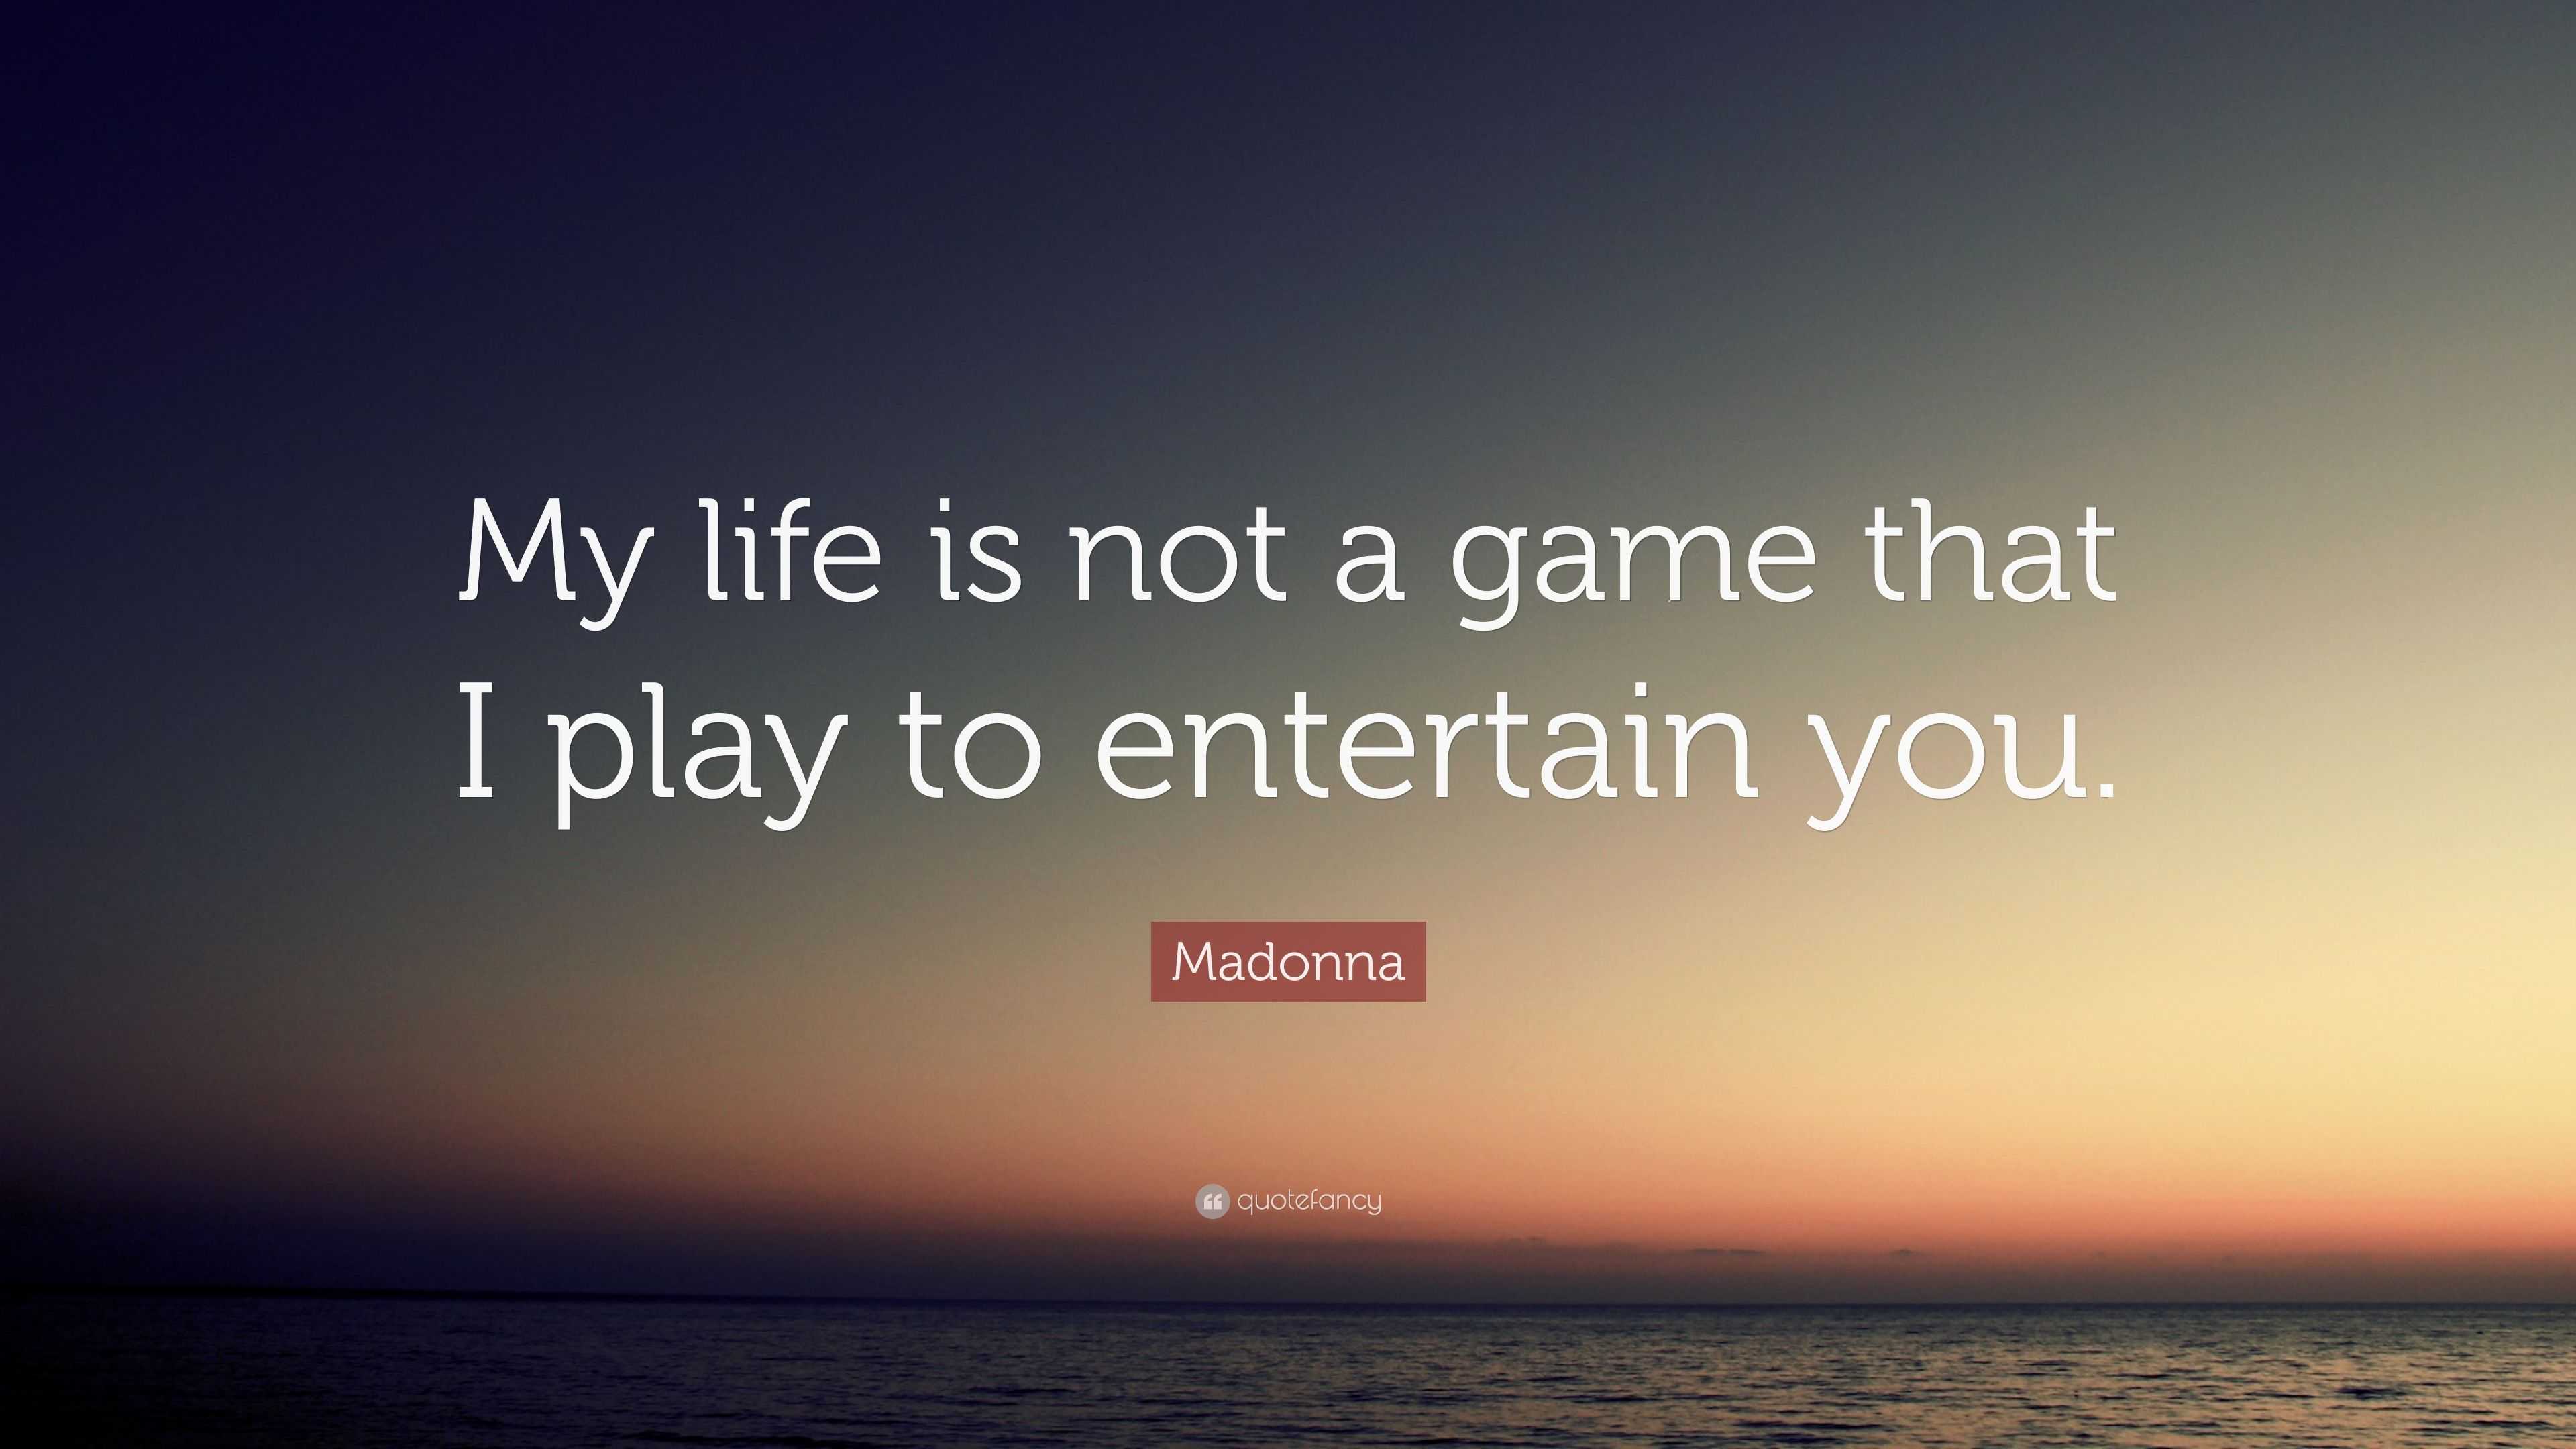 Madonna Quote My Life Is Not A Game That I Play To Entertain You